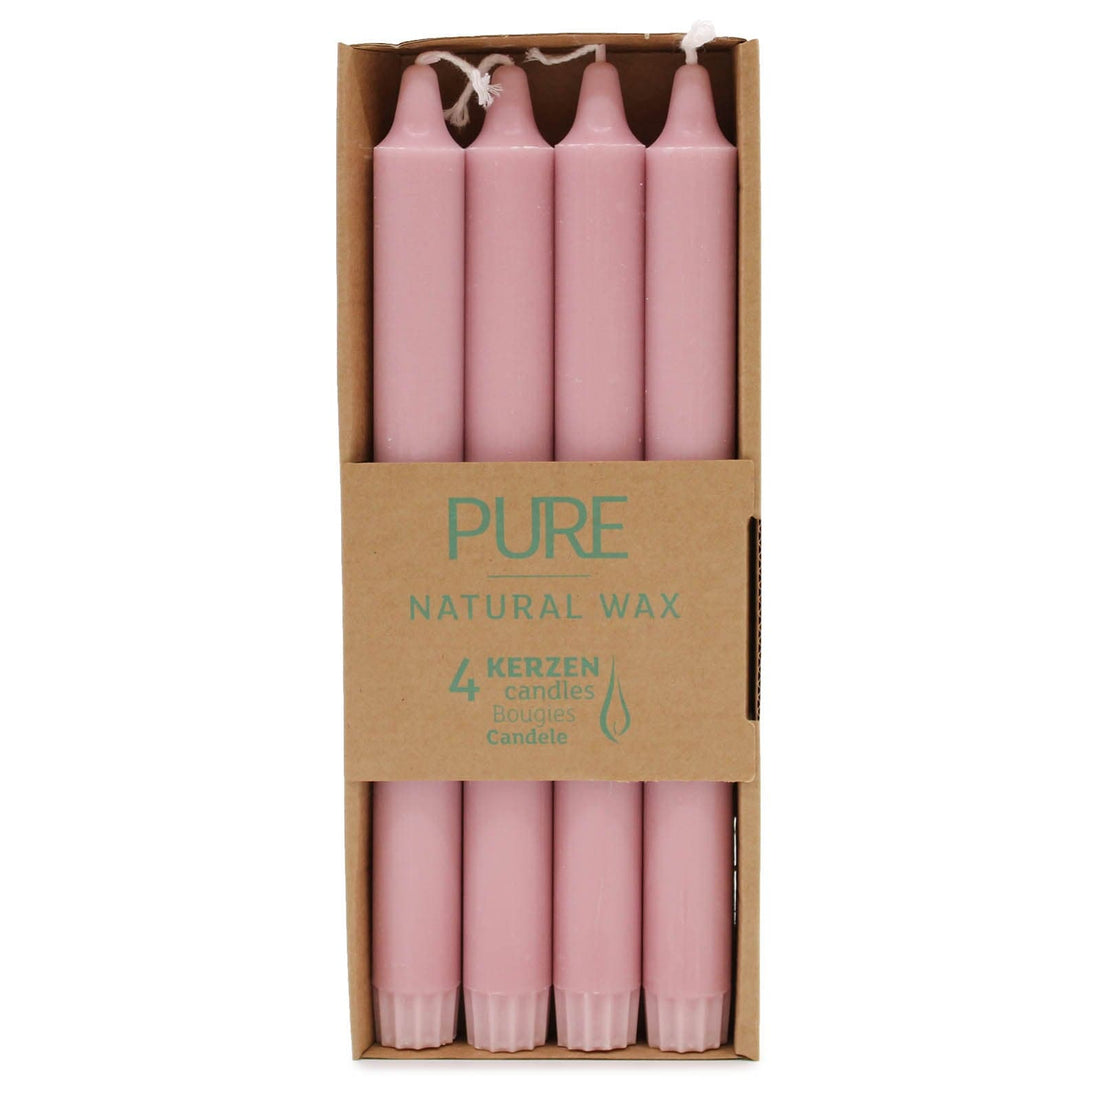 Pure Natural Wax Dinner Candle 25x2.3 - Antique Rose - best price from Maltashopper.com PUREC-04